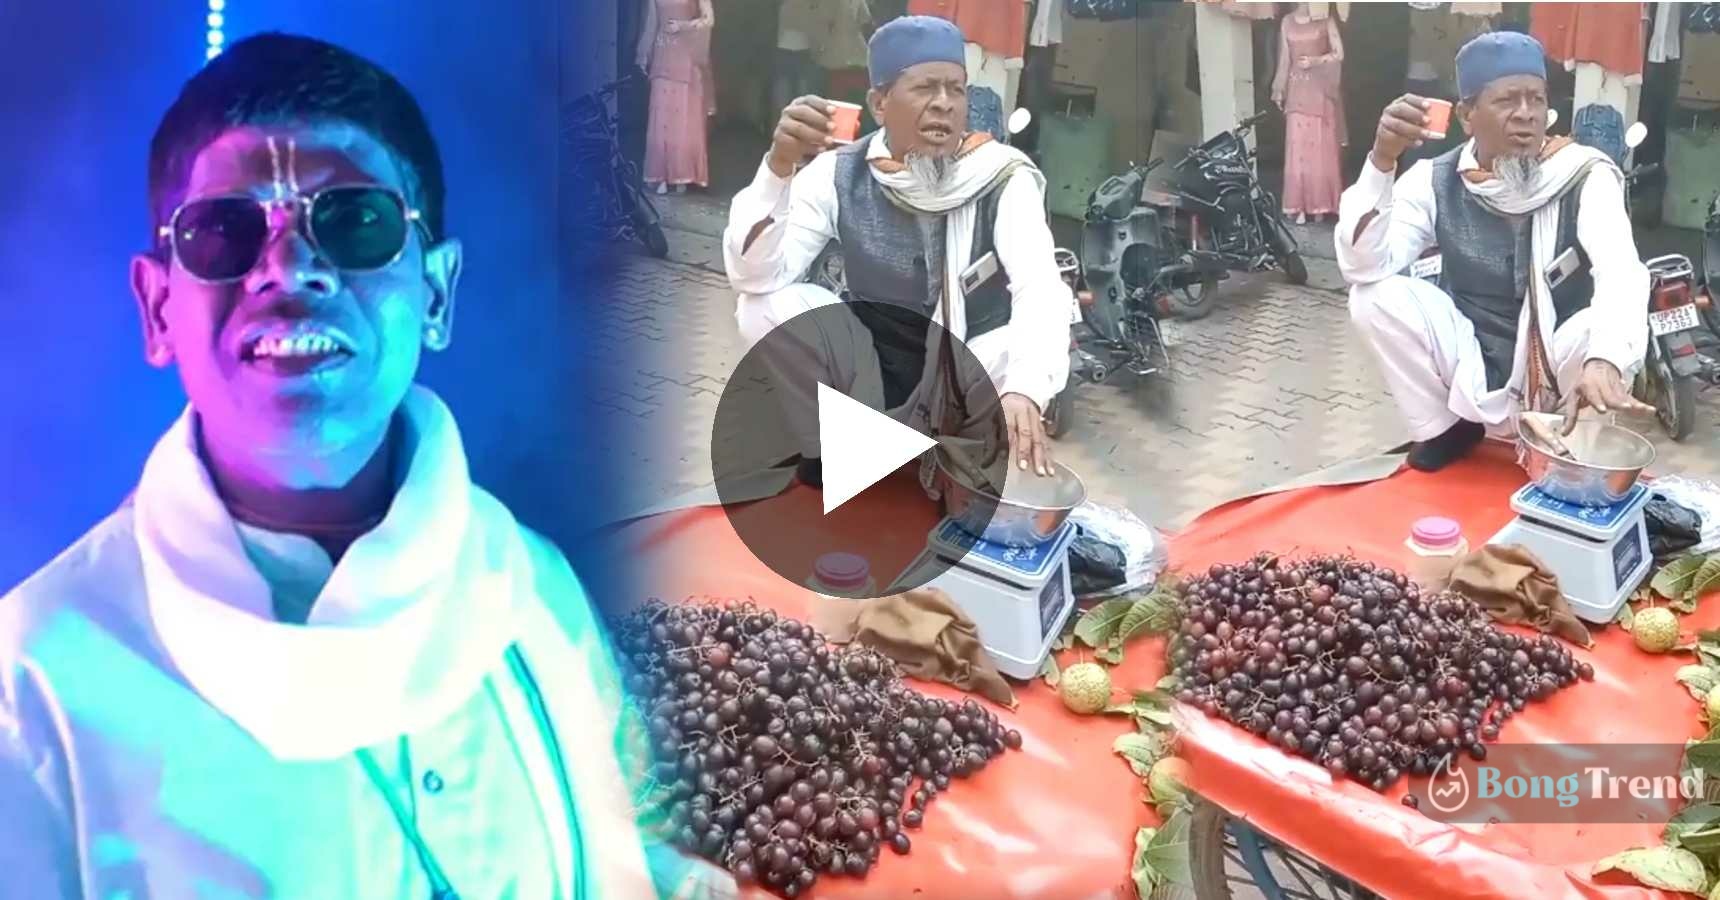 New Angur Song by guava seller became viral